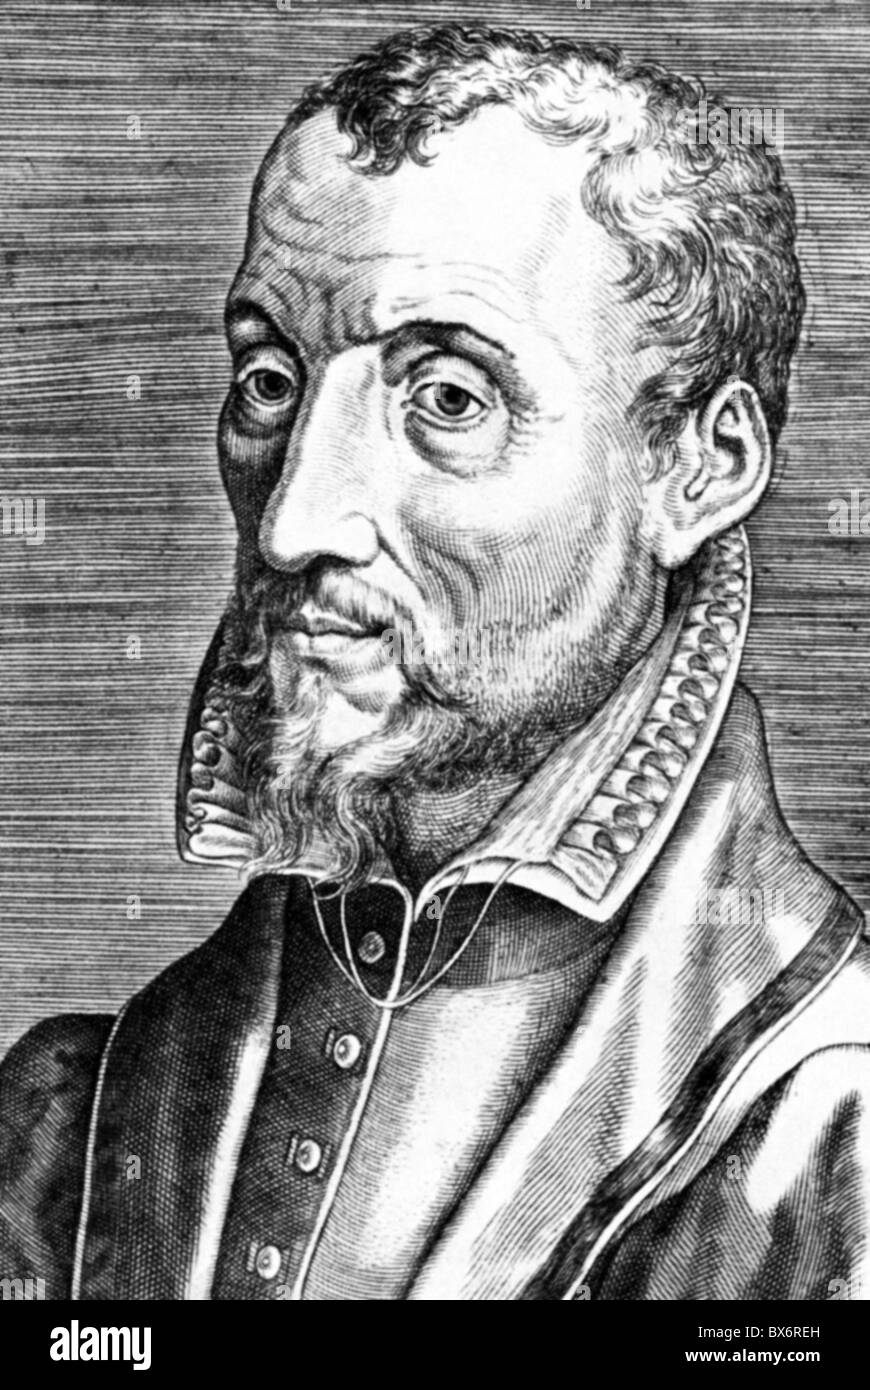 Plantin, Christophe, circa 1520 - 1.6.1589, French book printer, portrait, copper engraving, 16th century, , Artist's Copyright has not to be cleared Stock Photo